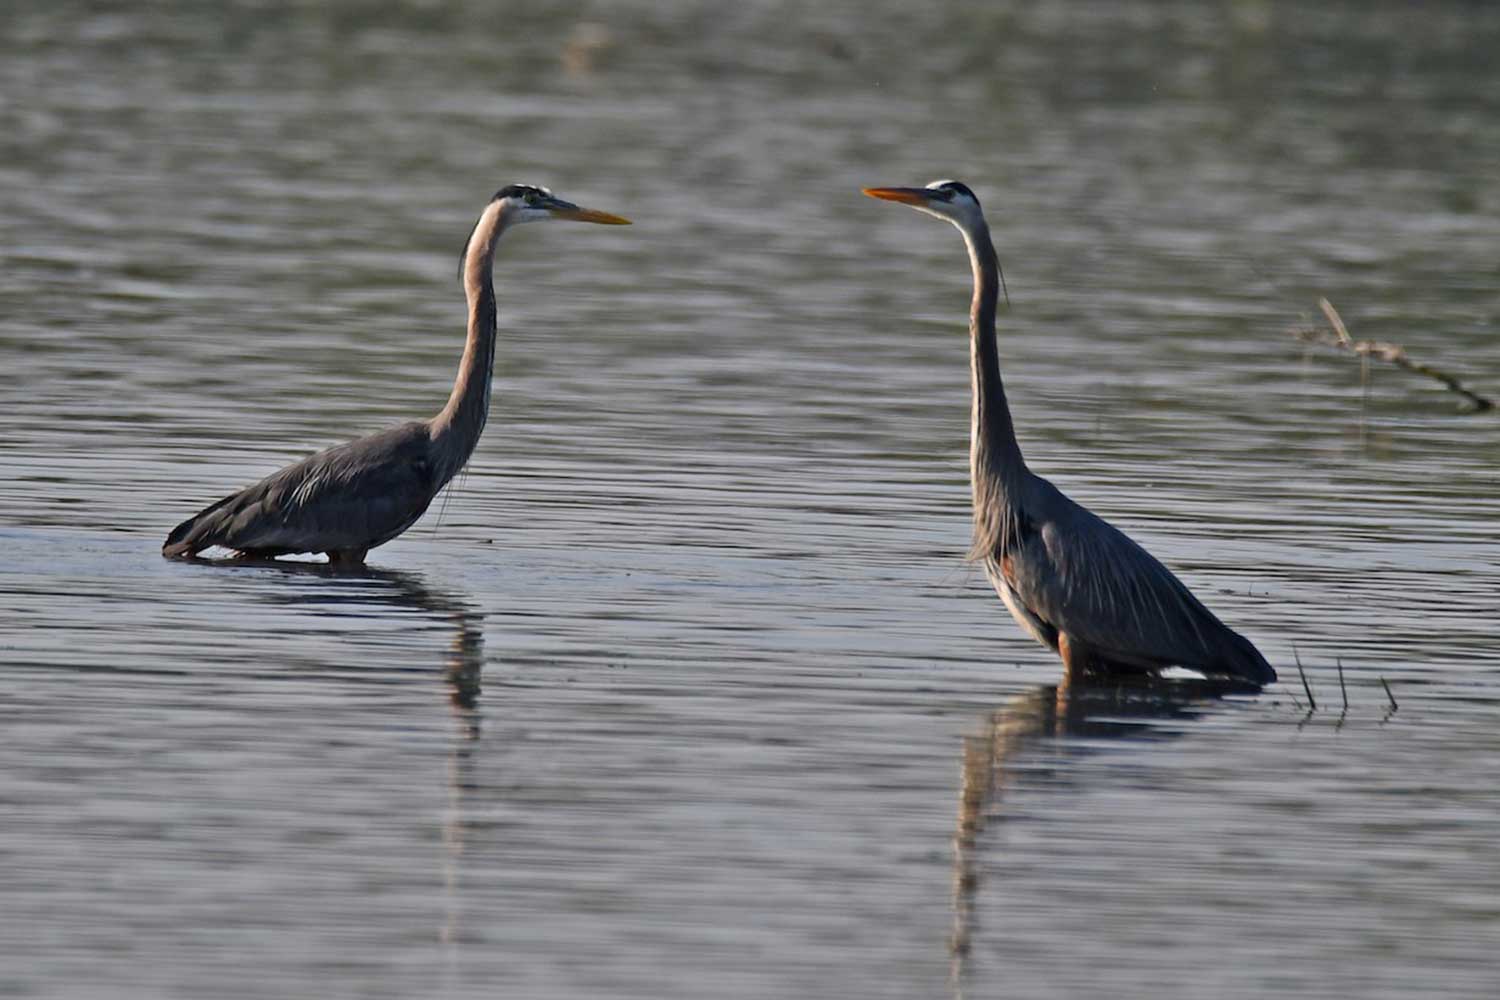 Two great blue herons in the water.